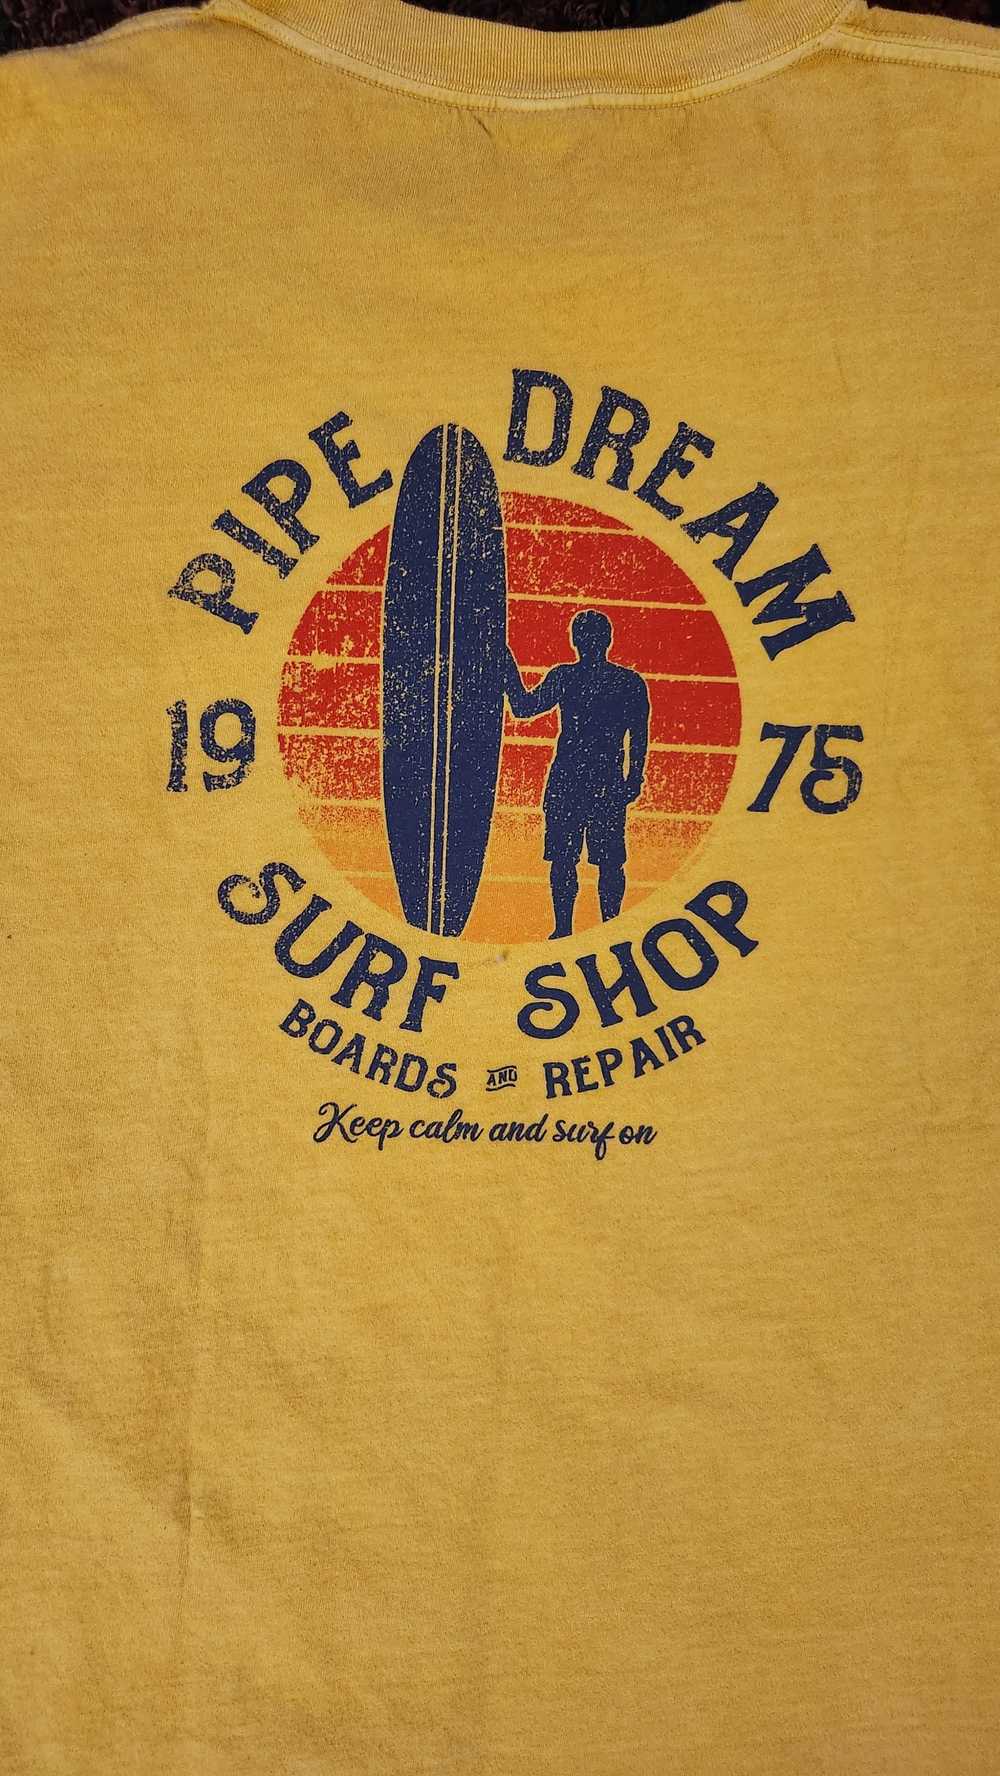 Crazy Shirts × Streetwear Pipe Dream Surf Shop - … - image 12